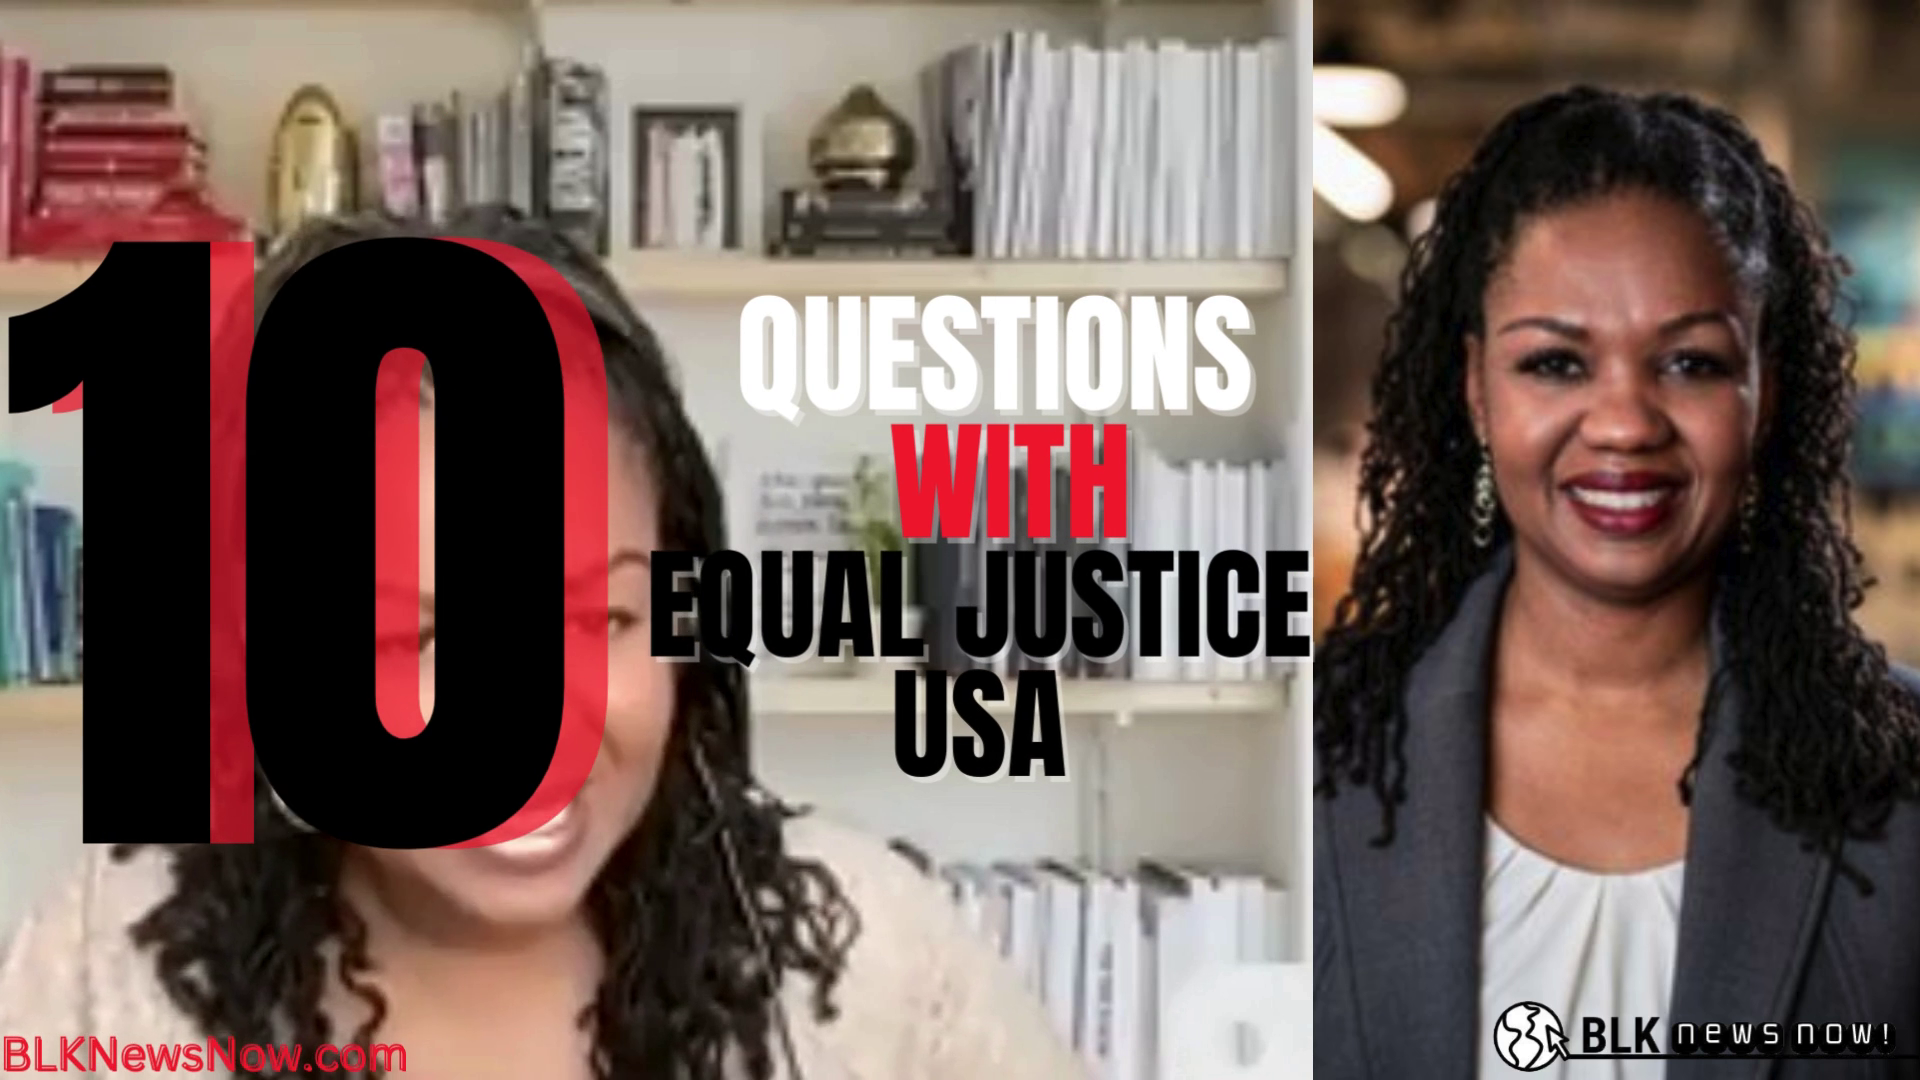 Equal Justice USA discusses partnership with pro athletes, criminal justice reforms